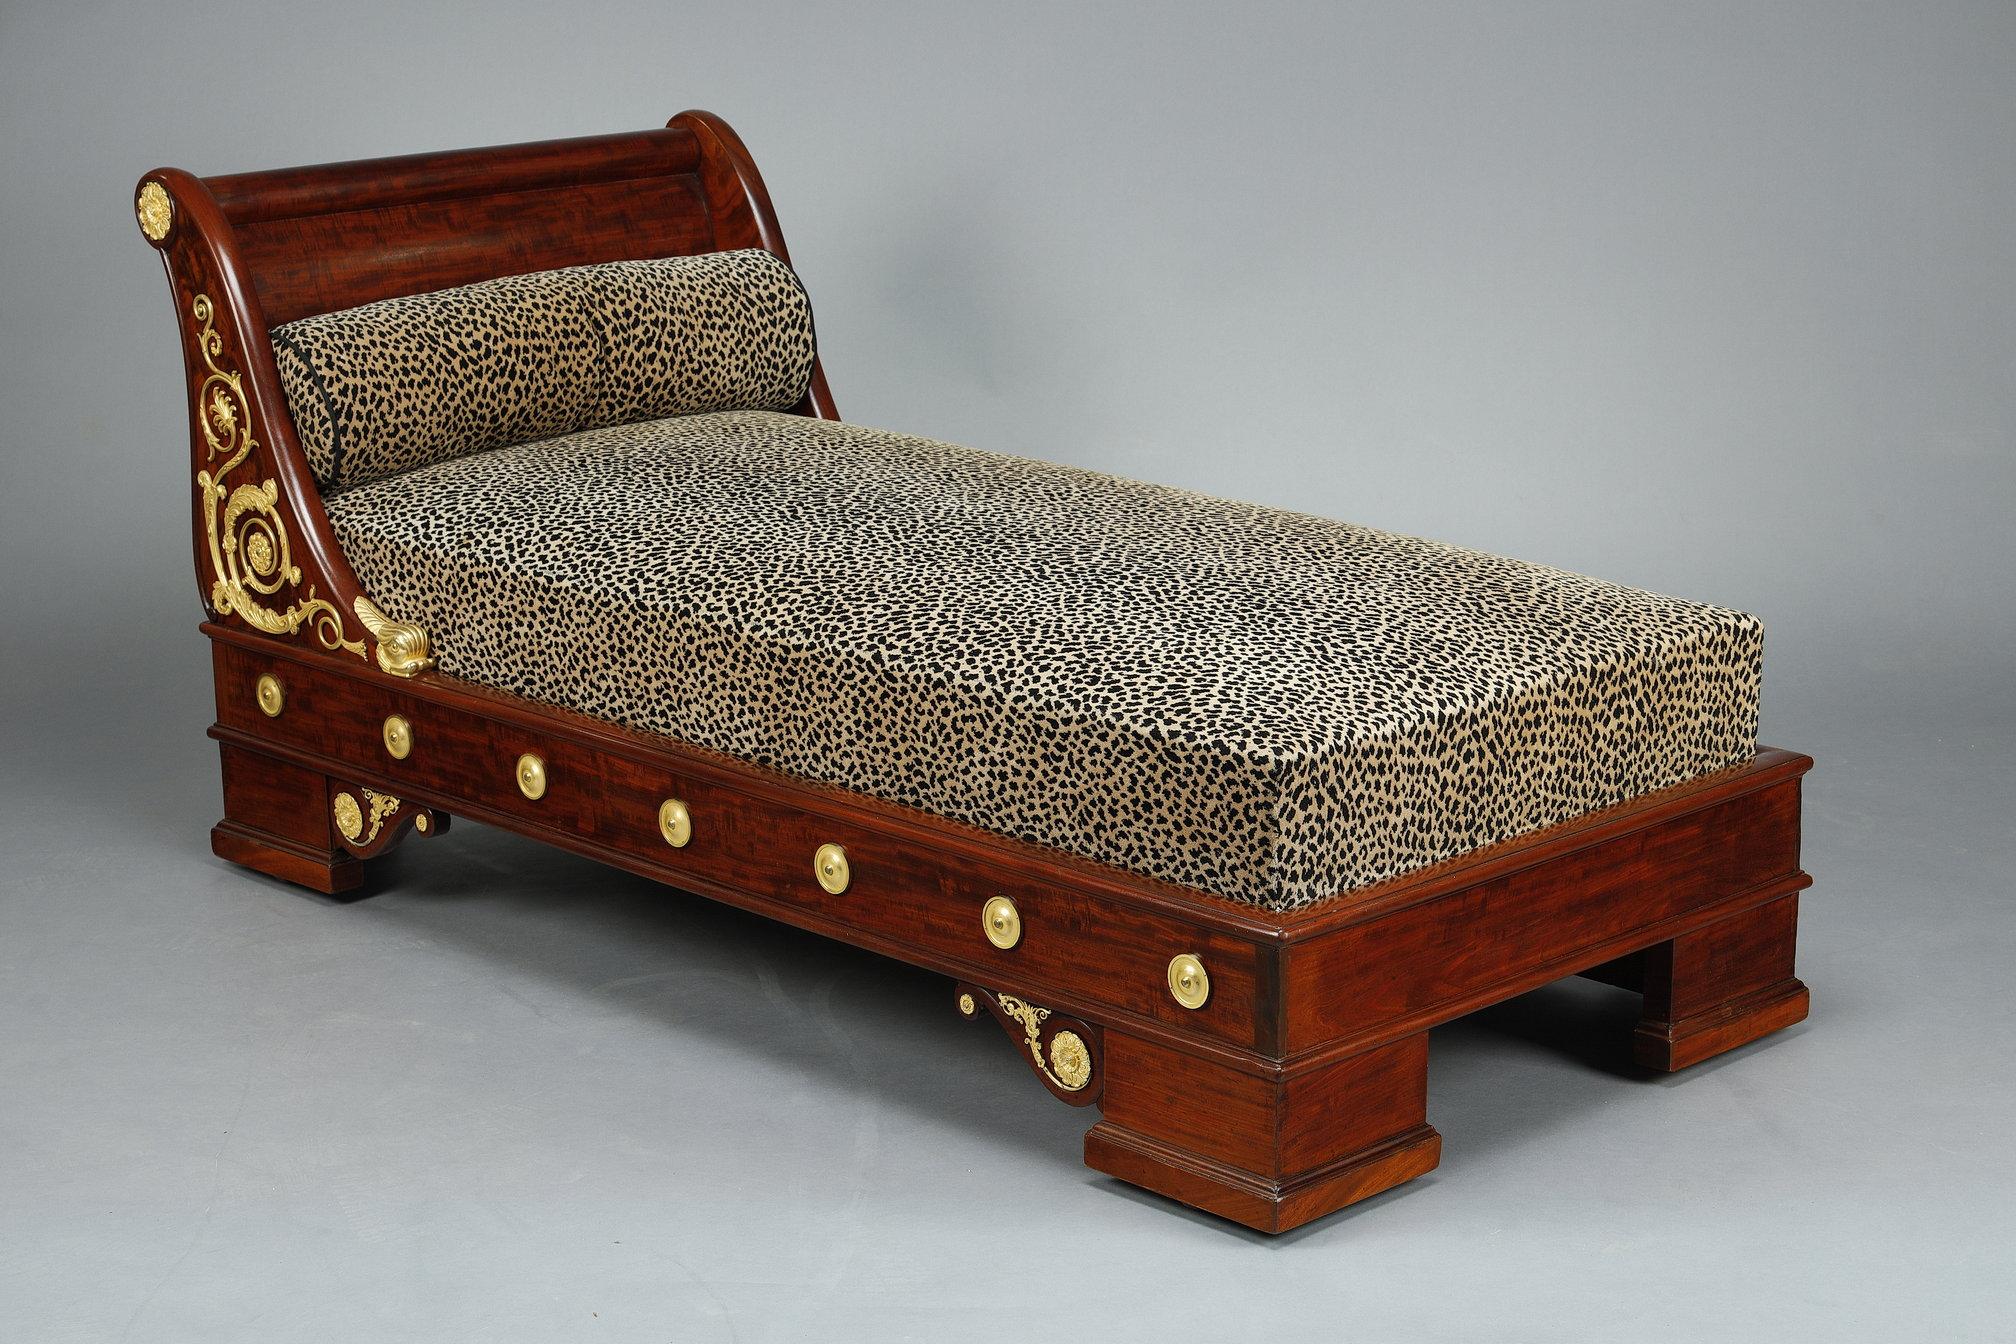 Early 19th Century Empire period Day Bed, from the designs of Percier & Fontaine  For Sale